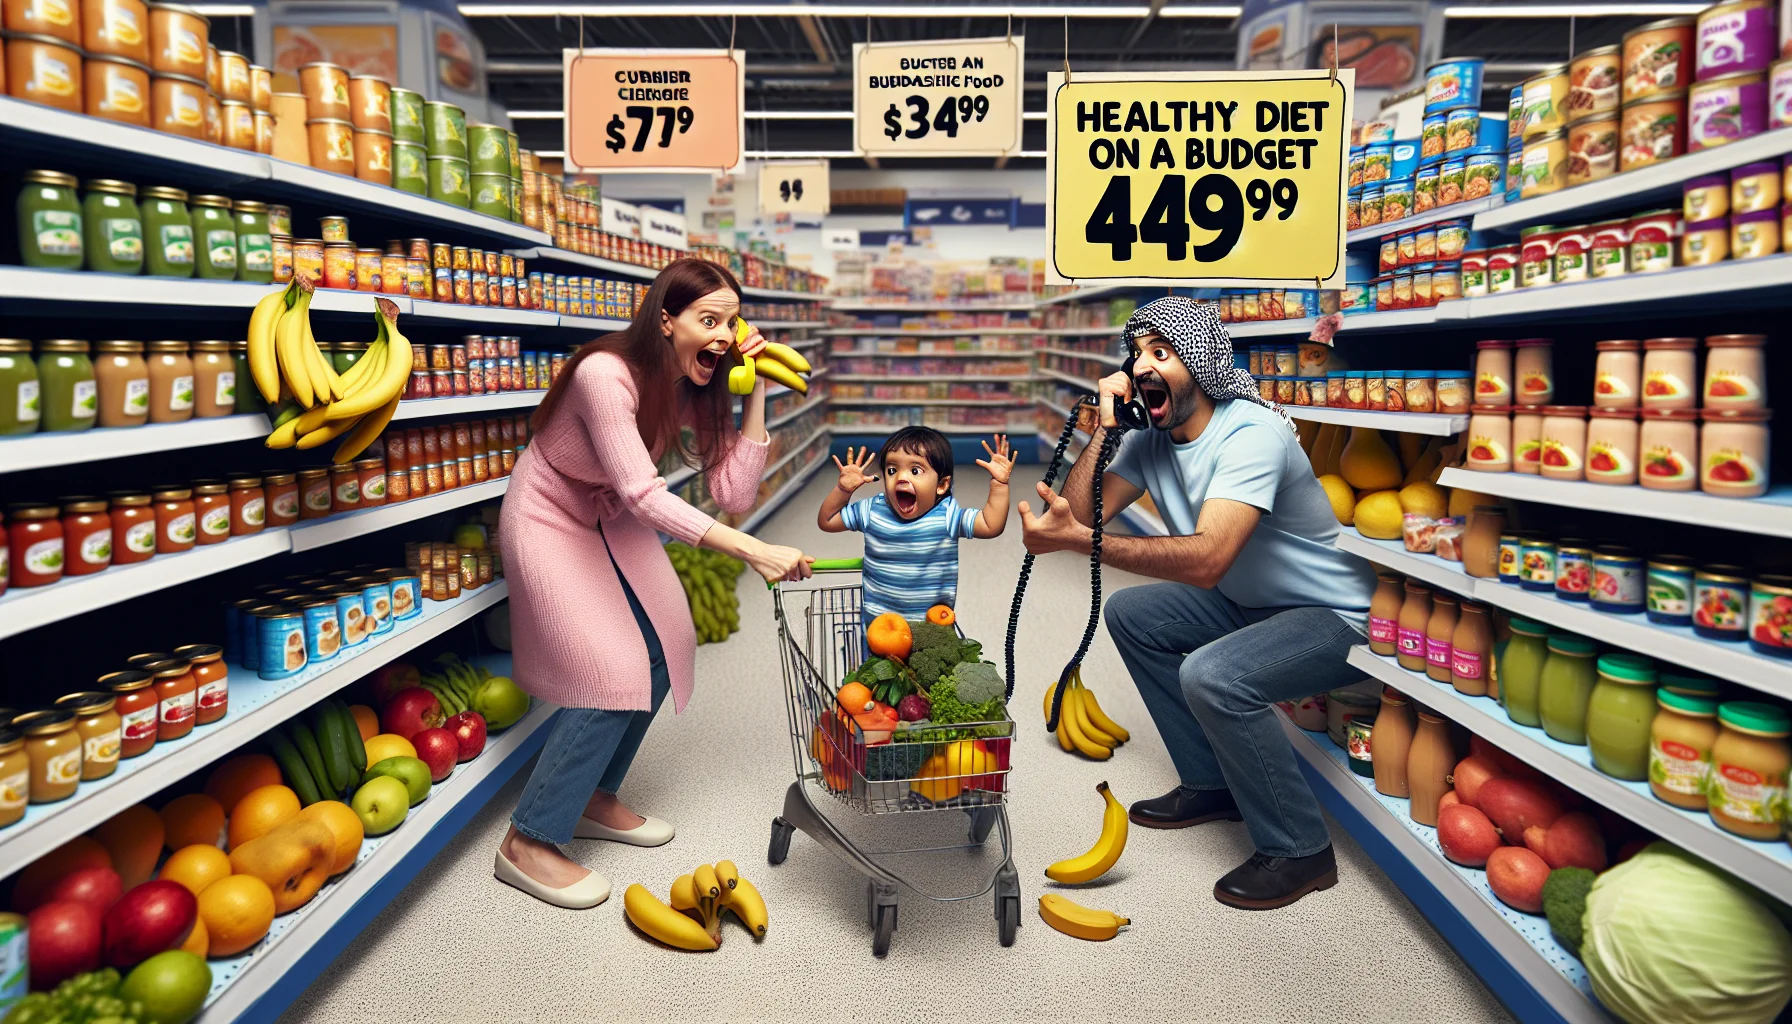 Imagine a charming, playful, and humorous scene in a supermarket. On the shelves, there's a colorful array of baby food essentials like pureed fruits and vegetables, infant cereal, and soft, bite-sized solid foods. These products are priced with catchy, budget-friendly tags that easily catch your eye. Engaged in this funny scenario, we see a Caucasian mother coaxing her little boy to reach for the healthier options, while a Middle-Eastern dad hilariously uses a bunch of bananas as a pretend telephone to his giggling daughter. This comedic and wholesome situation subtly encourages a healthy diet on a budget.